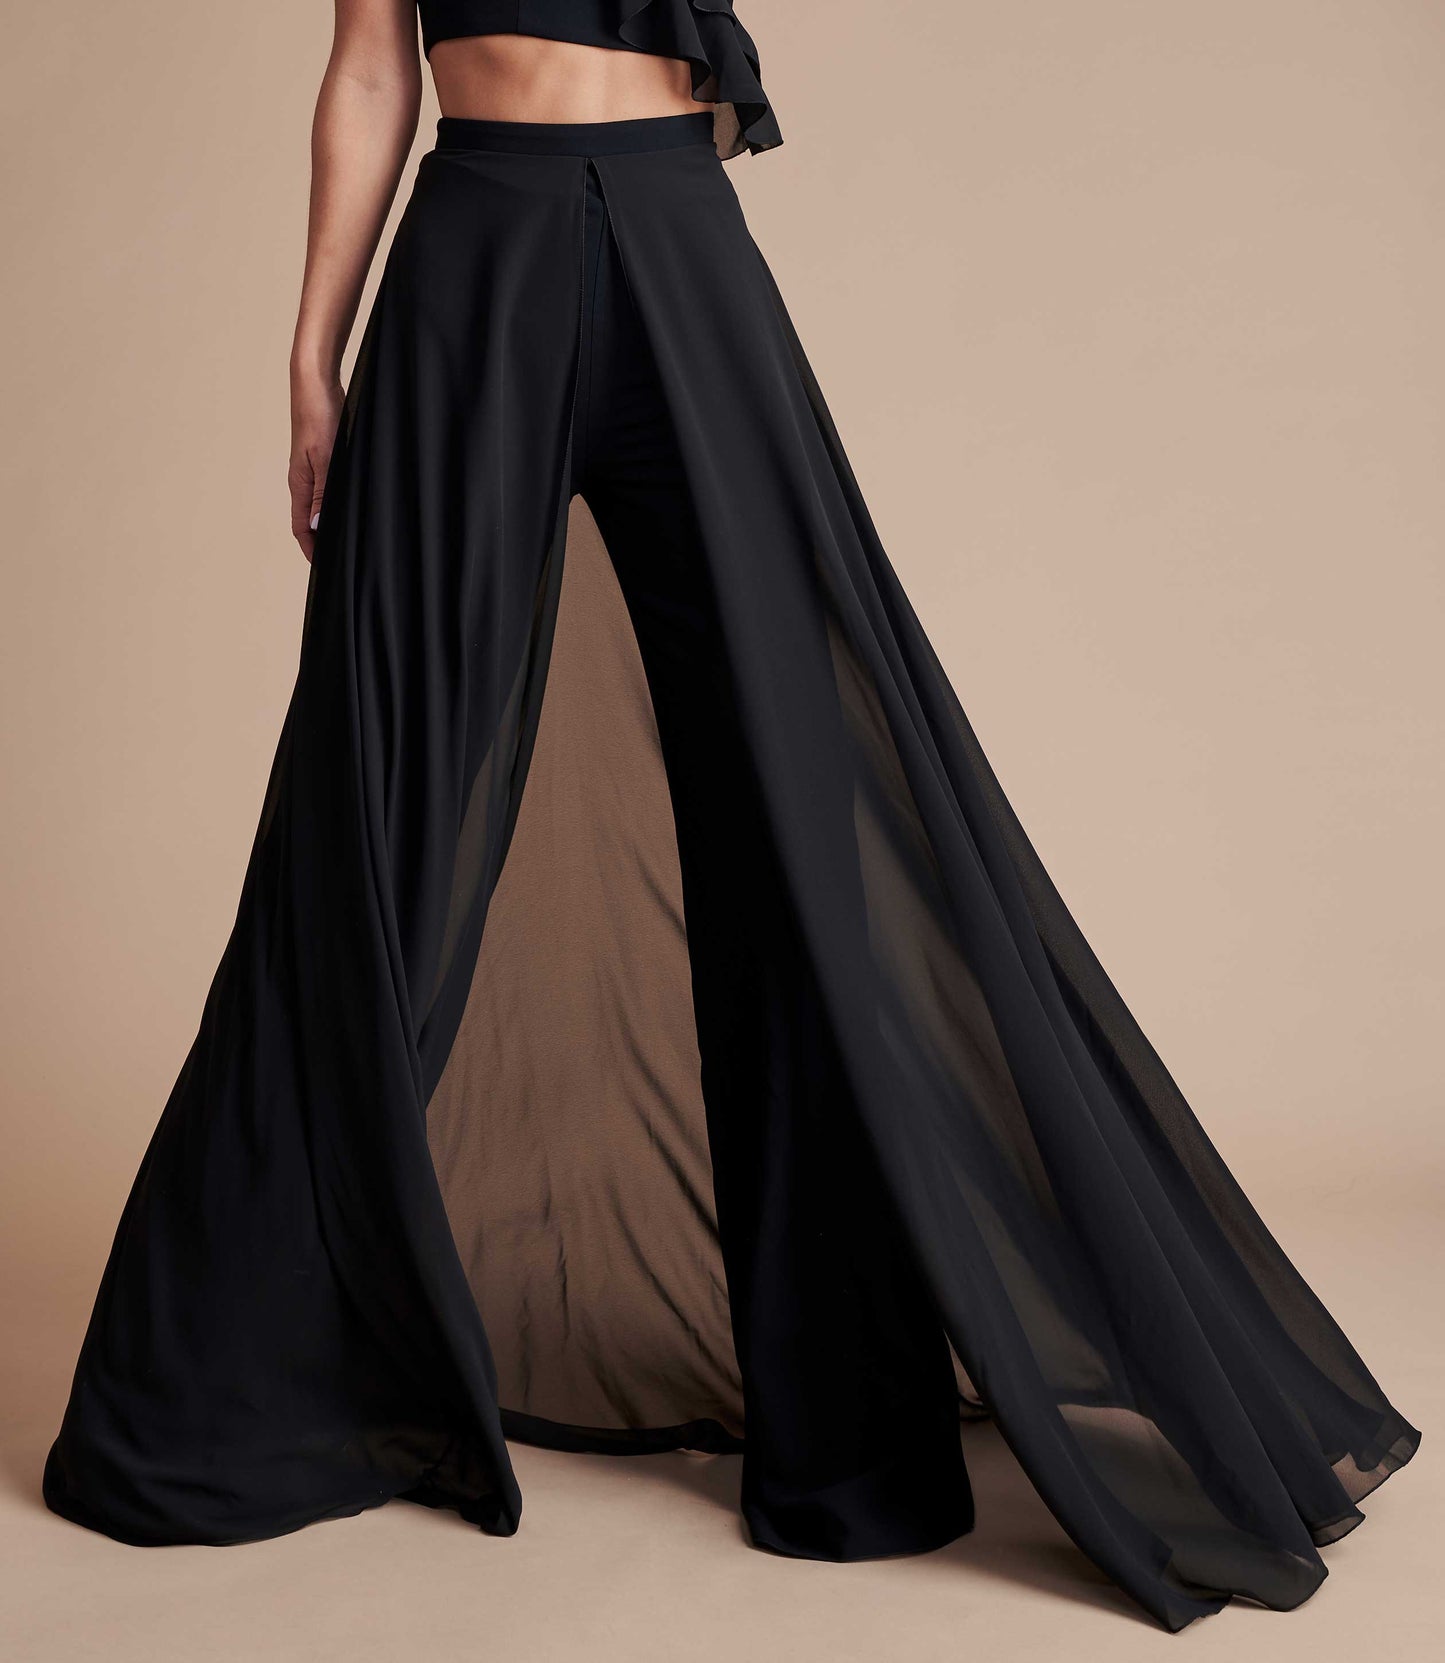 Black high-waisted wide leg trouser with floaty chiffon.